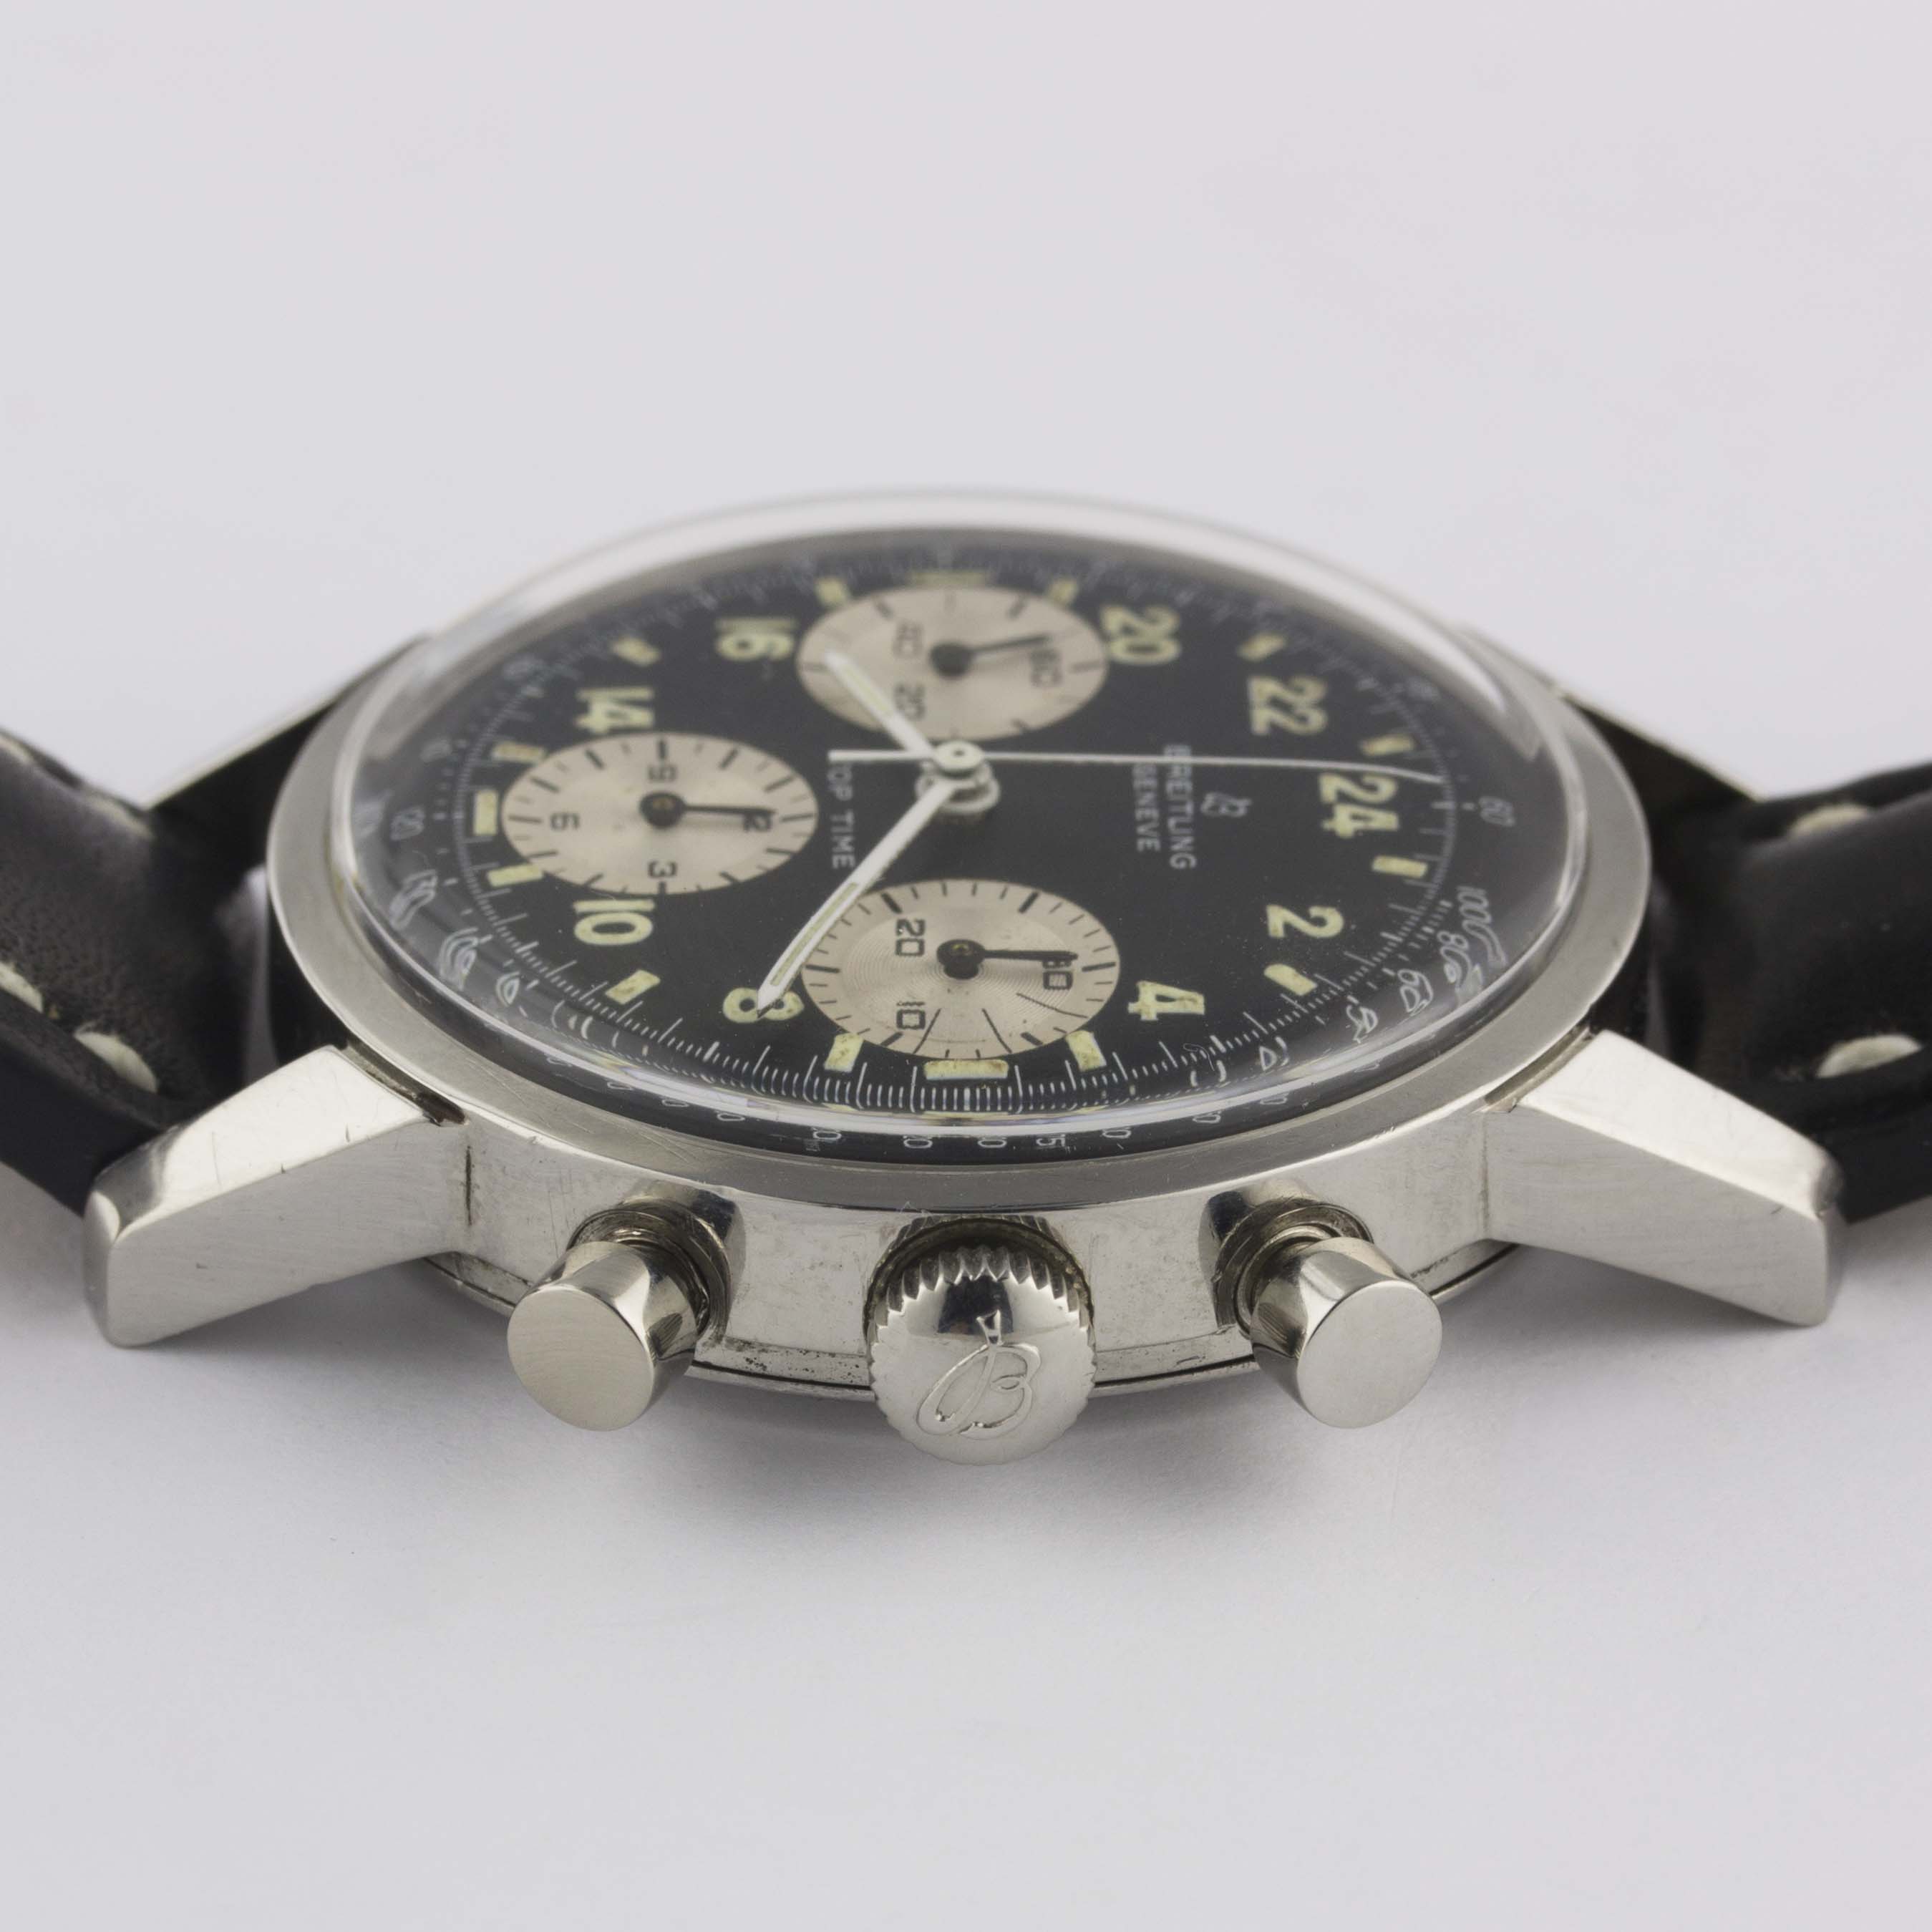 A RARE GENTLEMAN'S STAINLESS STEEL BREITLING TOP TIME 24 HOUR CHRONOGRAPH WRIST WATCH CIRCA 1968, - Image 11 of 12